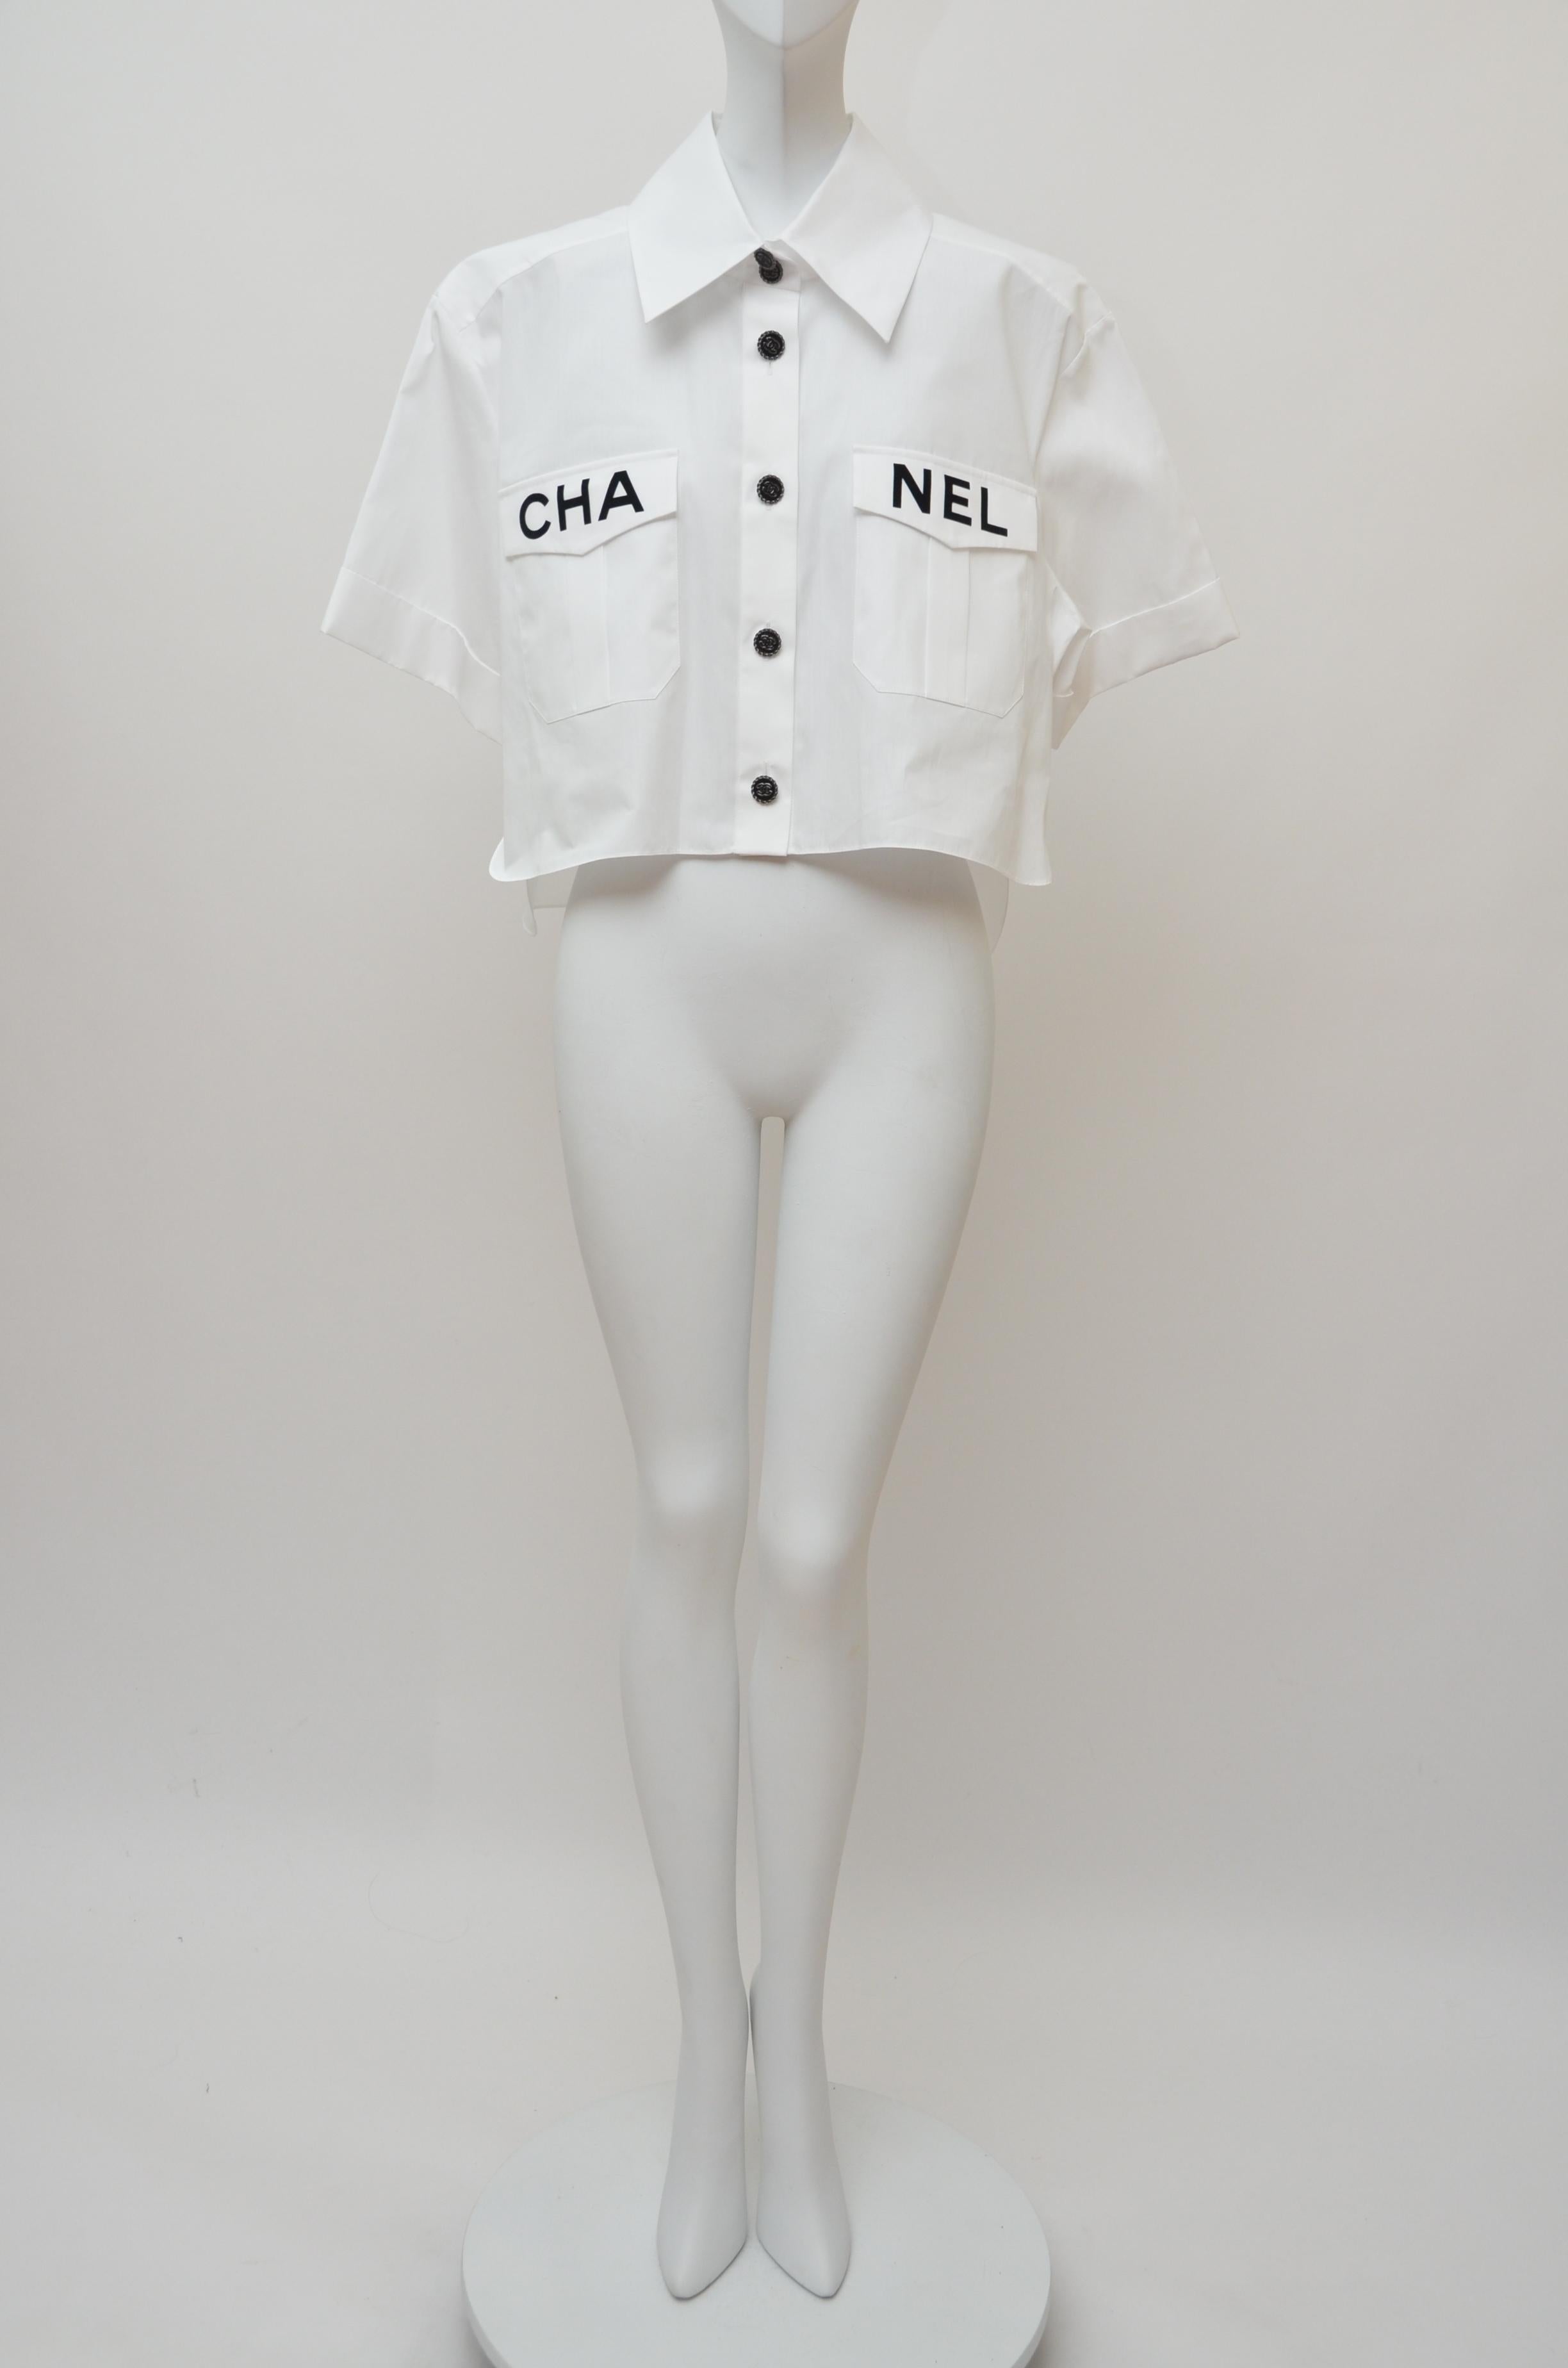 Chanel Shirt Spring Summer 2019 White Shirt Runway Piece
Sold out and most sought piece from KL last runway.
New with tags ,dust bag and Chanel hanger.
Size 40FR.
Please familiarize yourself with fit since there are no returns due to exclusivity of